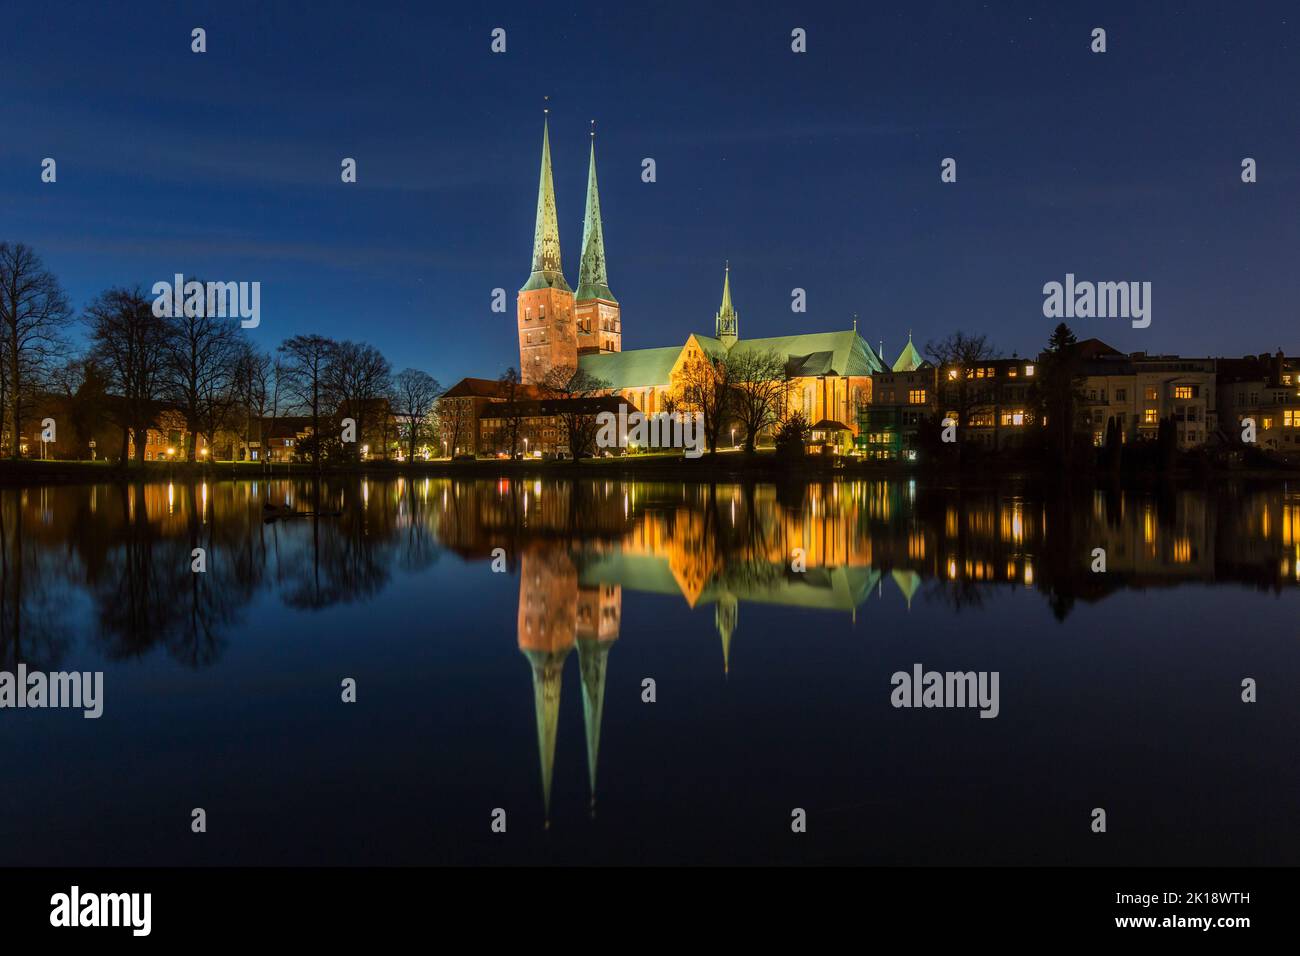 Dom zu Lübeck Cathedral / Lübecker Dom reflected in water of the river Trave at night at the Hanseatic City of Lübeck, Schleswig-Holstein, Germany Stock Photo